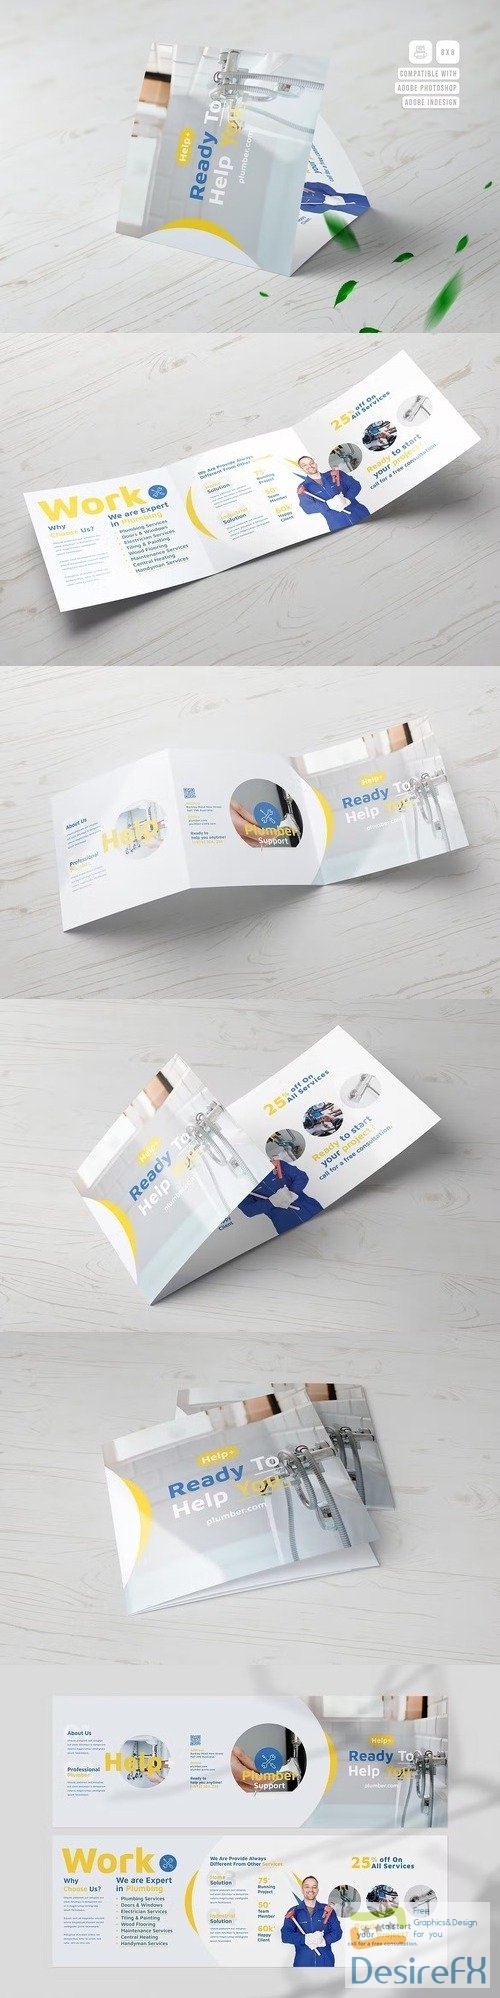 Plumbers Square Trifold Brochure